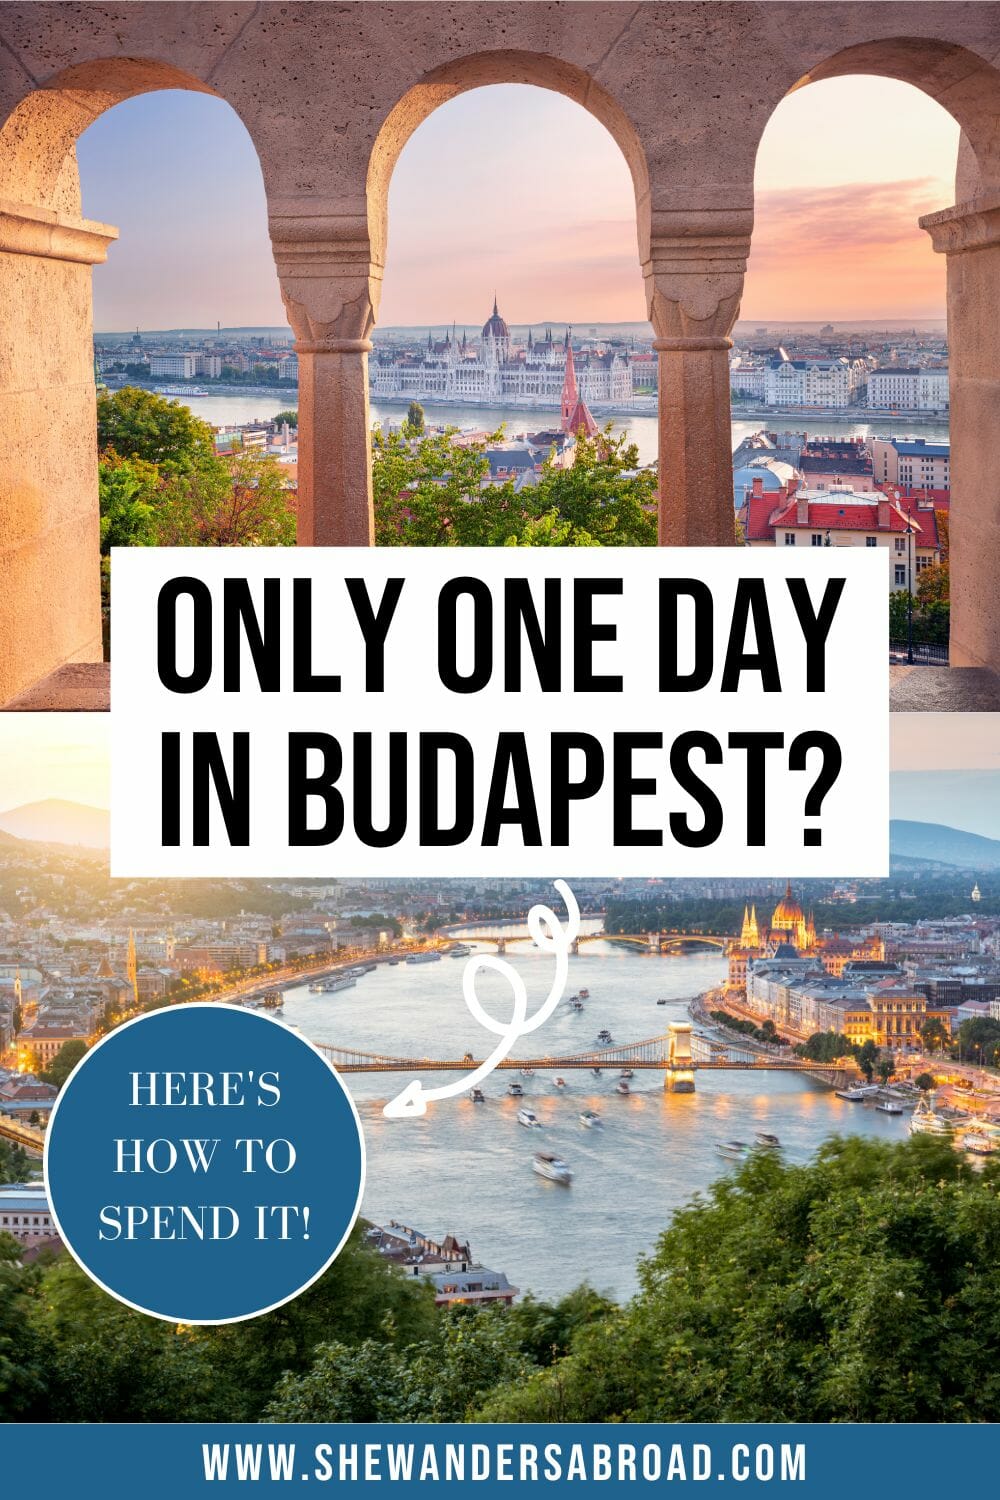 One Day in Budapest: A Local’s Guide to Touring Budapest in a Day